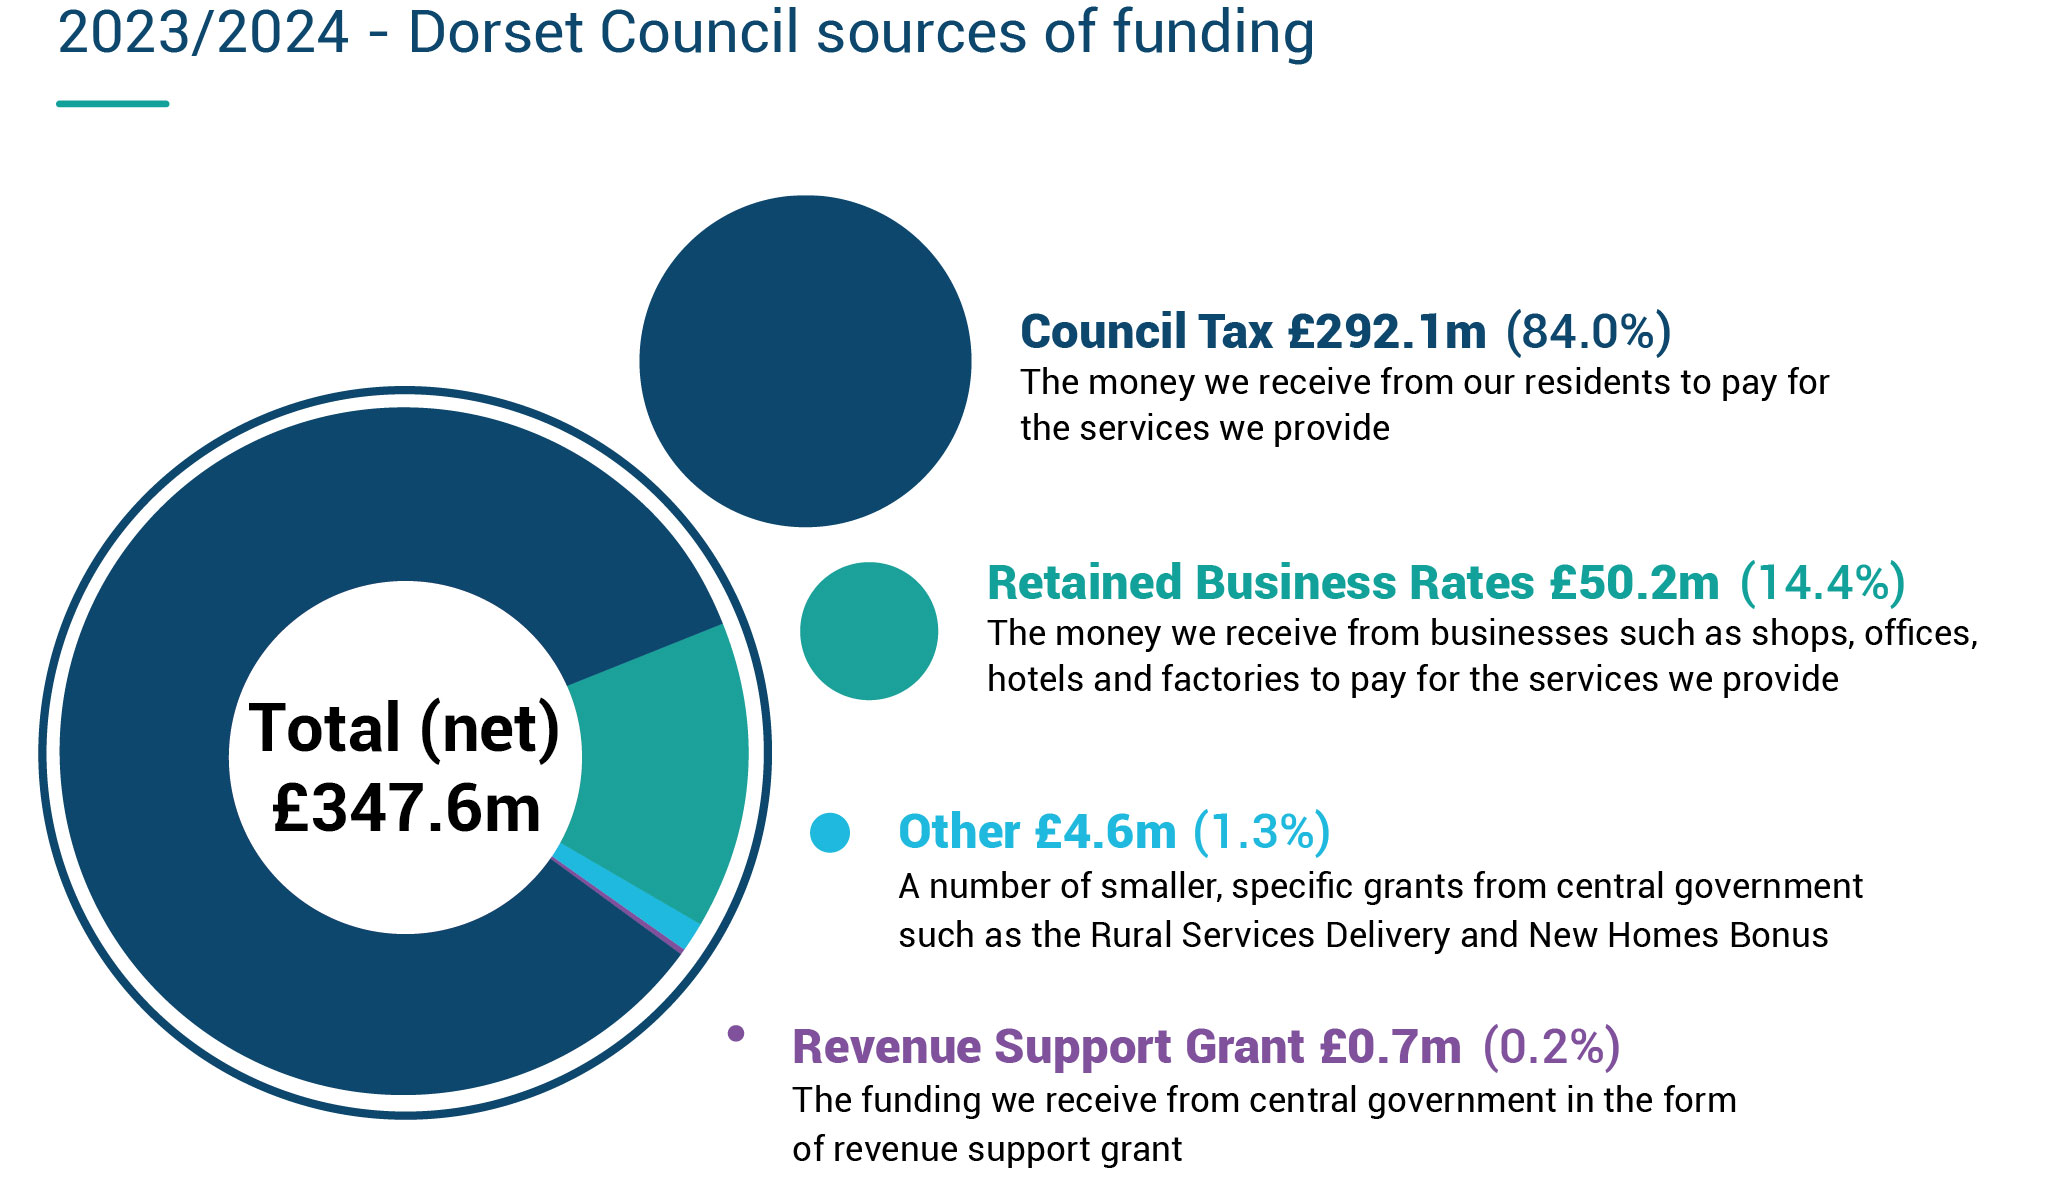 Pie chart displaying 2023/24 Dorset Council sources of funding